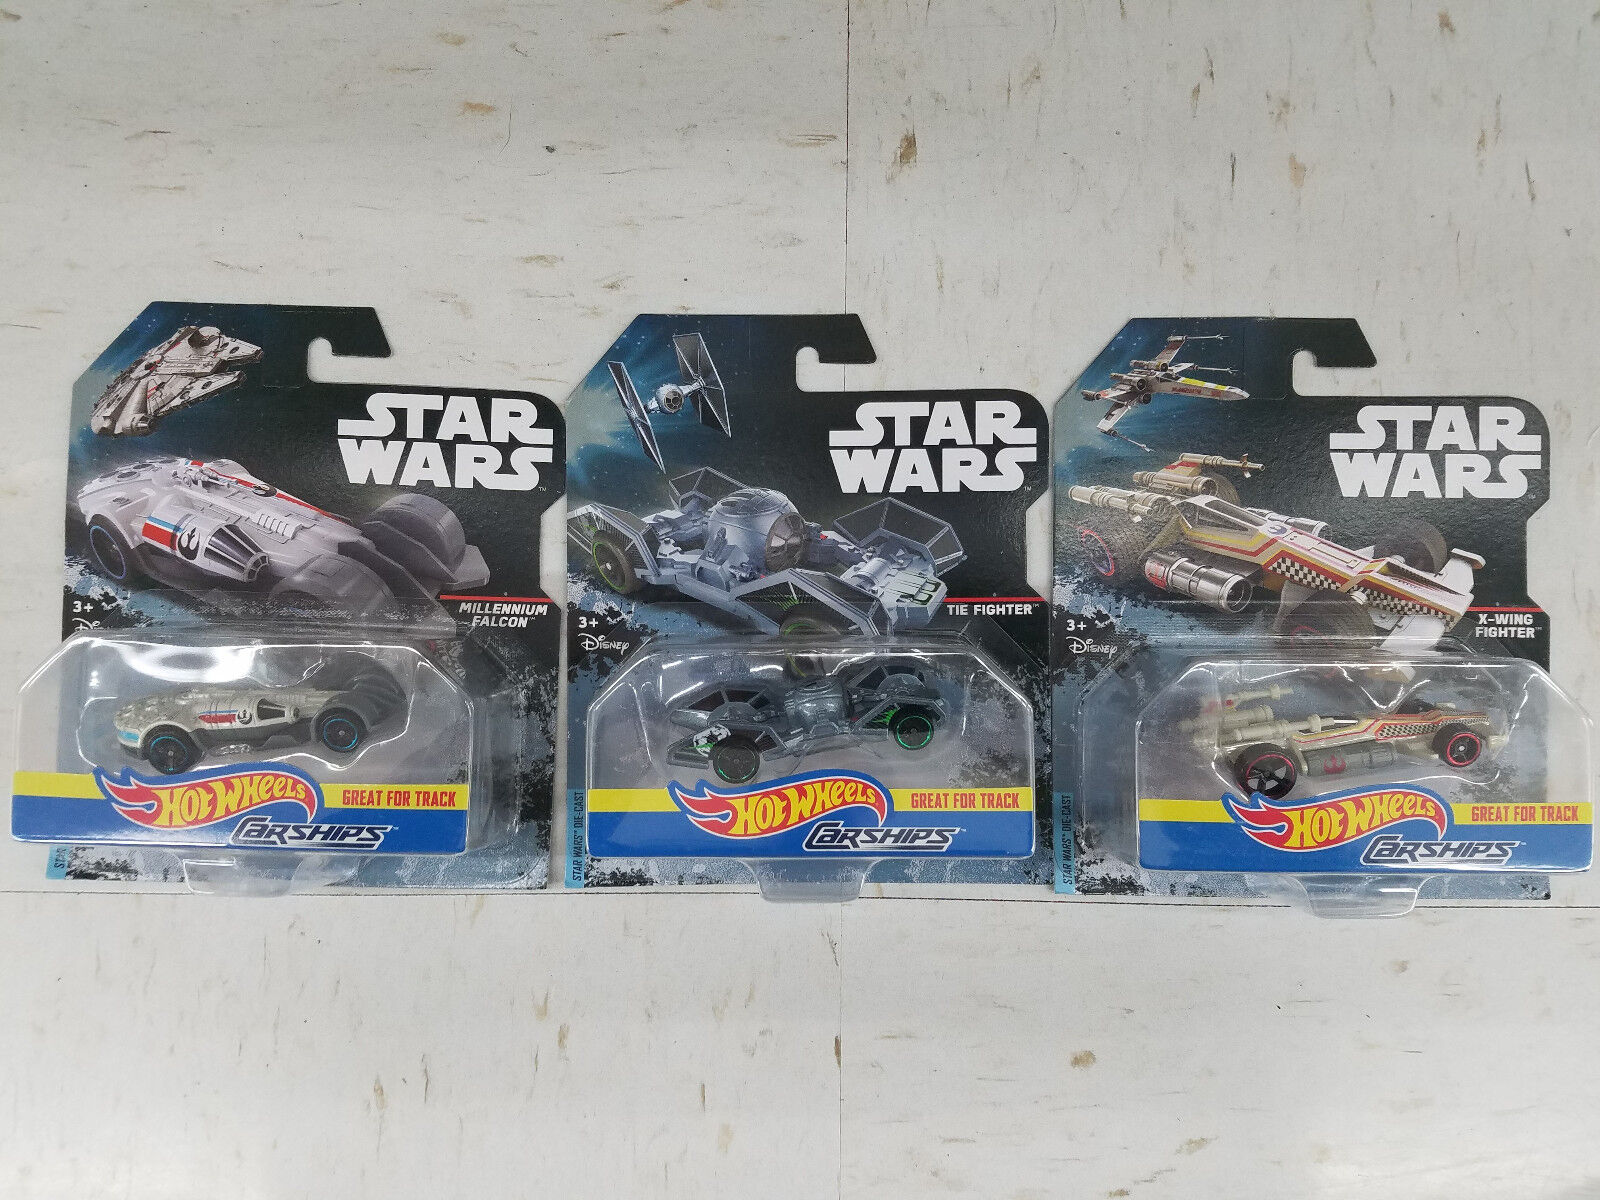 Hot Wheels Star Wars Carships Set of Best Millennium Falcon, Tie Fighter & Xwing